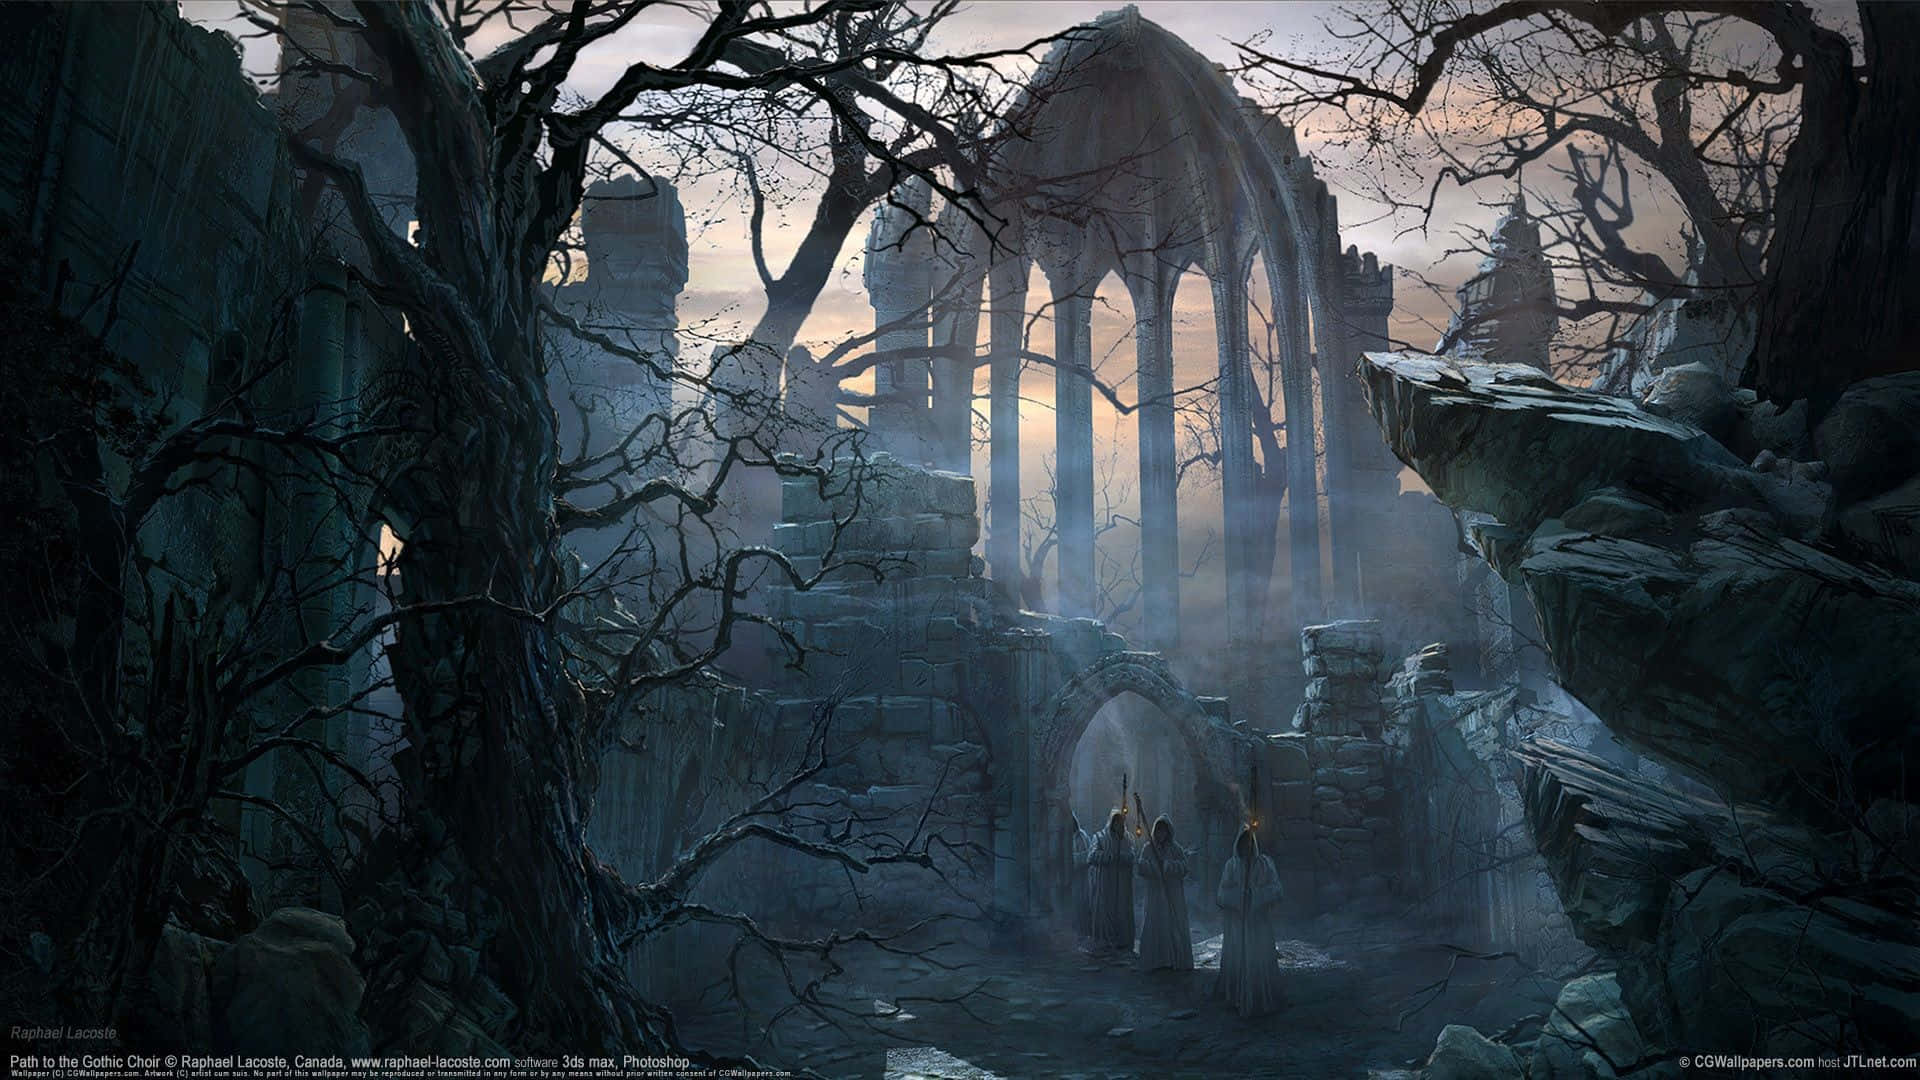 Get into the gothic spirit with this atmospheric wallpaper Wallpaper